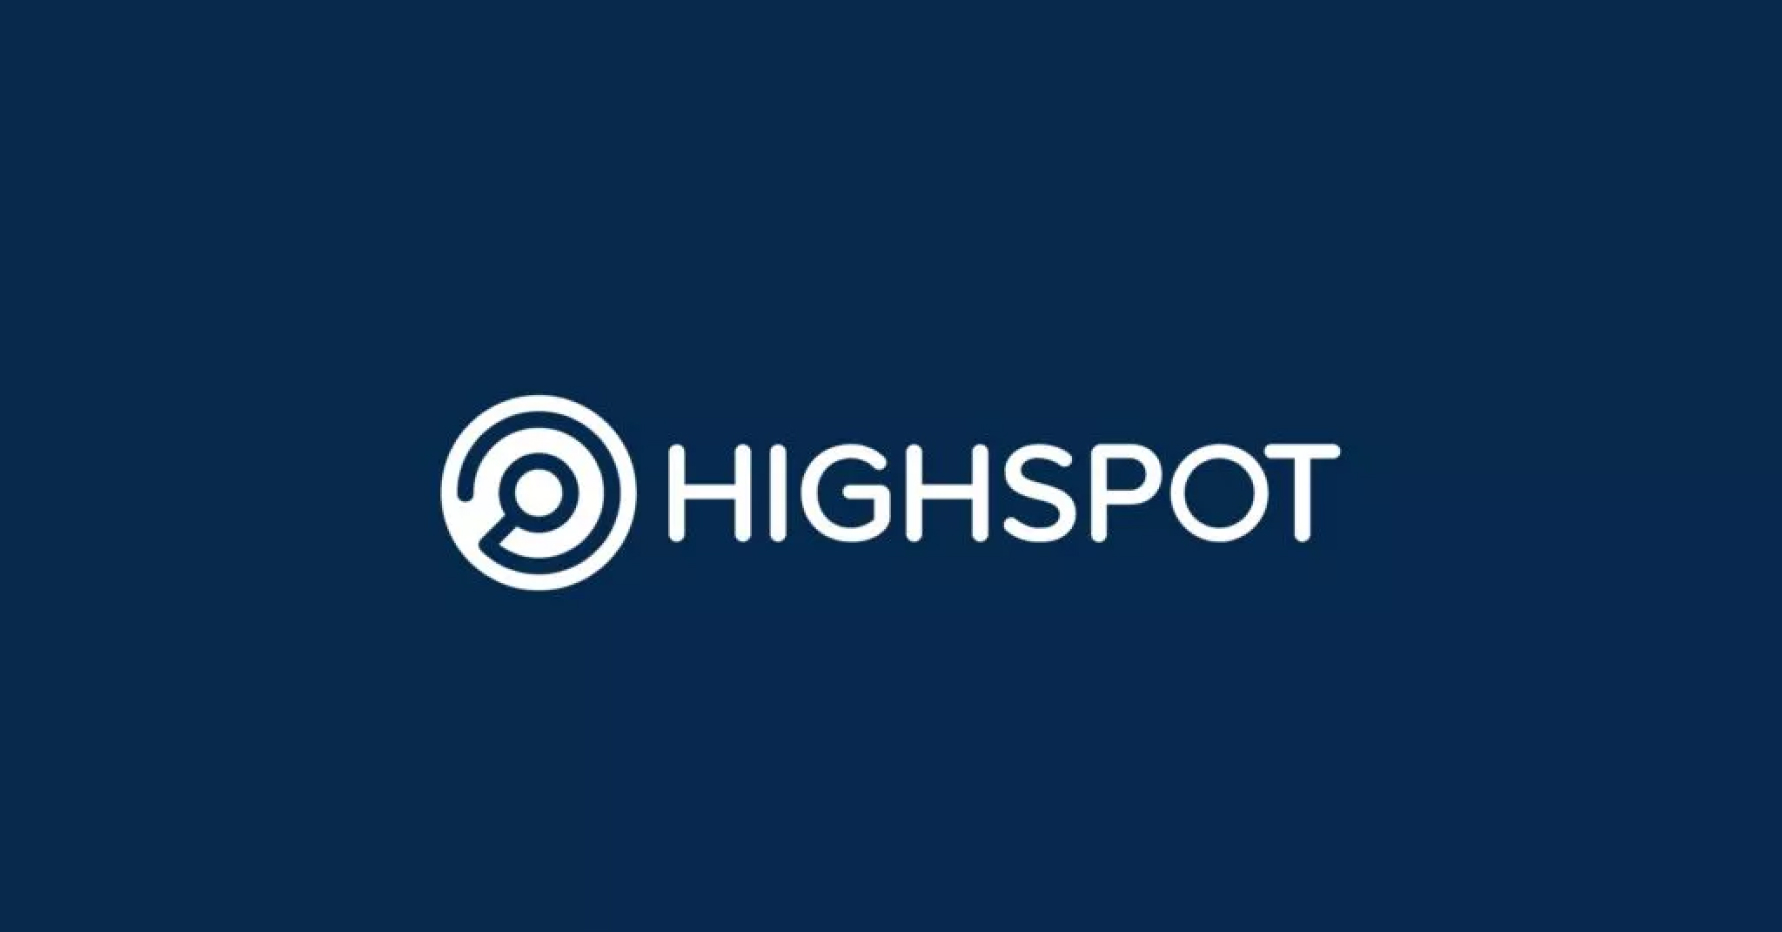 Banner image with Highspot logo